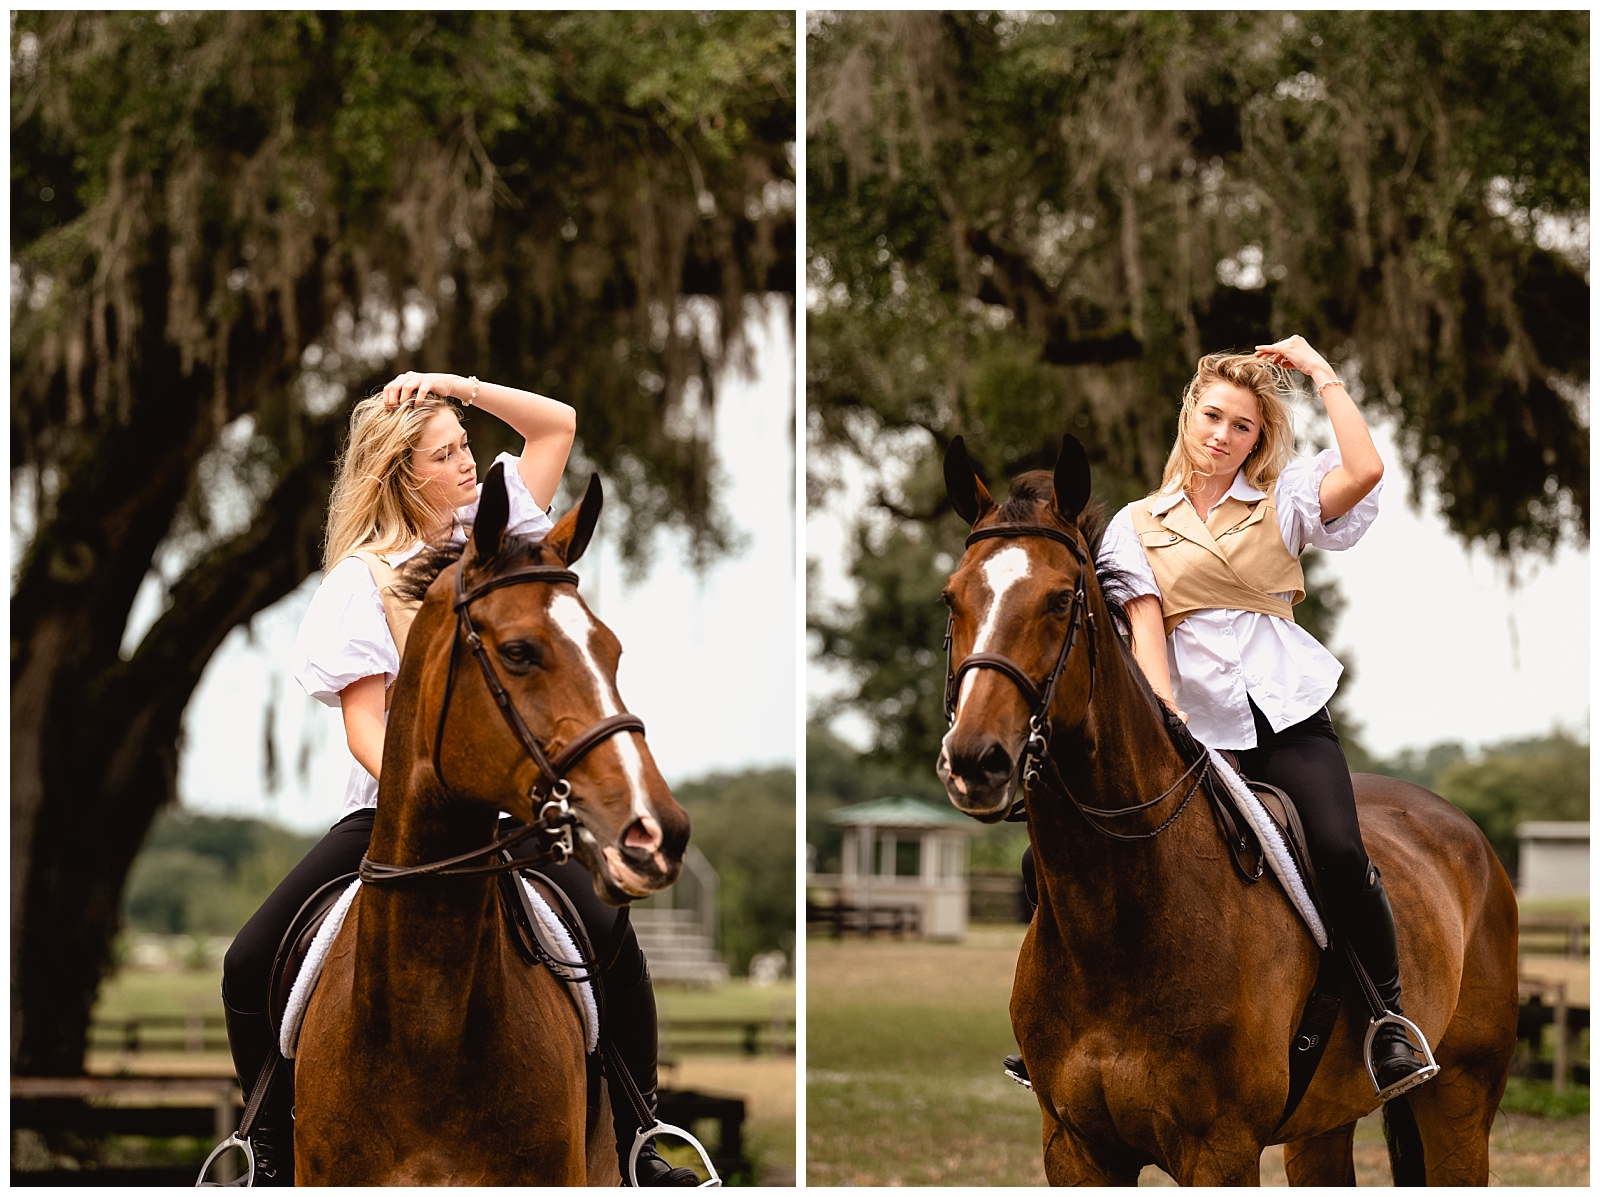 Ocala photoshoot with Horse and Rider. Under saddle photos of hunter/jumper and equitation horse. Equestrian styled outfit with blouse from Odette Boutique.